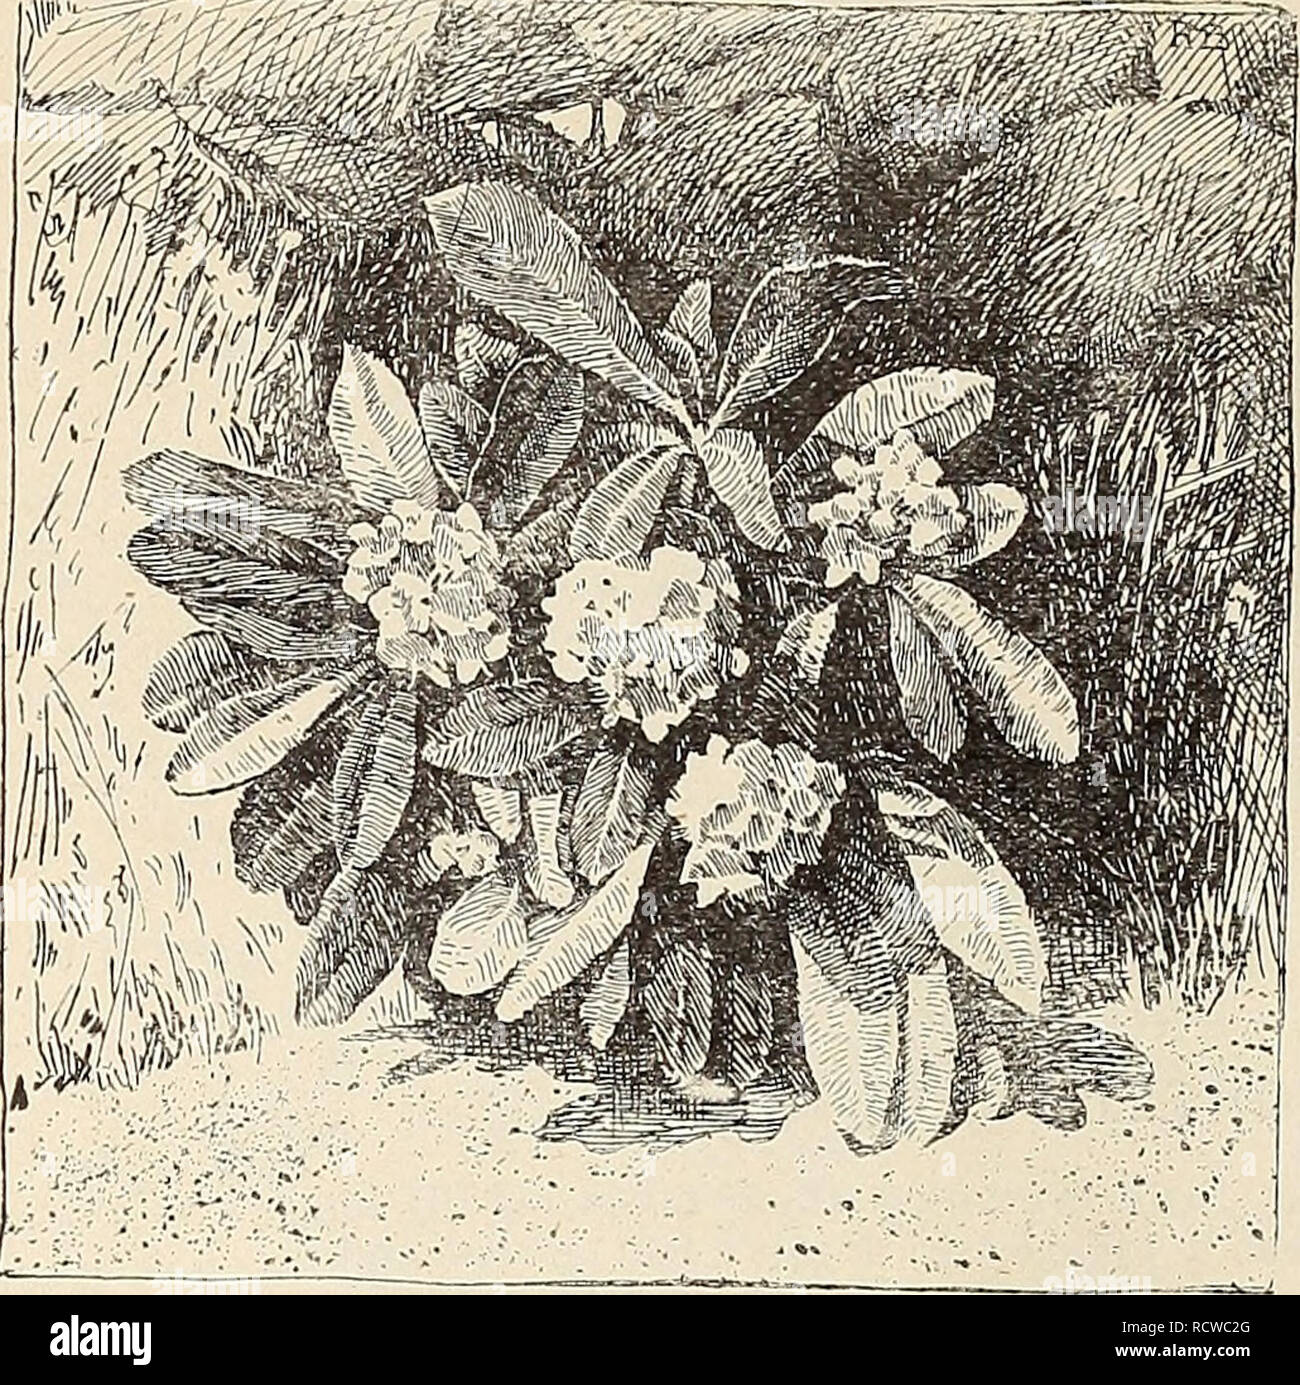 . Descriptive catalogue and price-list of native plants of the southern Alleghany Mountains including deciduous and evergreen trees, flowering shrubs, hardy herbaceous perennials, vines, orchids, ferns, aquatics and bog plants. Nurseries (Horticulture) North Carolina Catalogs; Plants, Ornamental Catalogs. 12 CATALOGUE OF THE HIGHLANDS NURSERY, KALMIA, continued. K. latifolia (Mountain Laurel).. From The American Garden. CLUSTER OF RHODODENDRON MAXIMUM. One of the best jof all our native evergreen shrubs, often 20 to 30 feet high in its wild growth among the mountains. Its close corymbs of larg Stock Photo